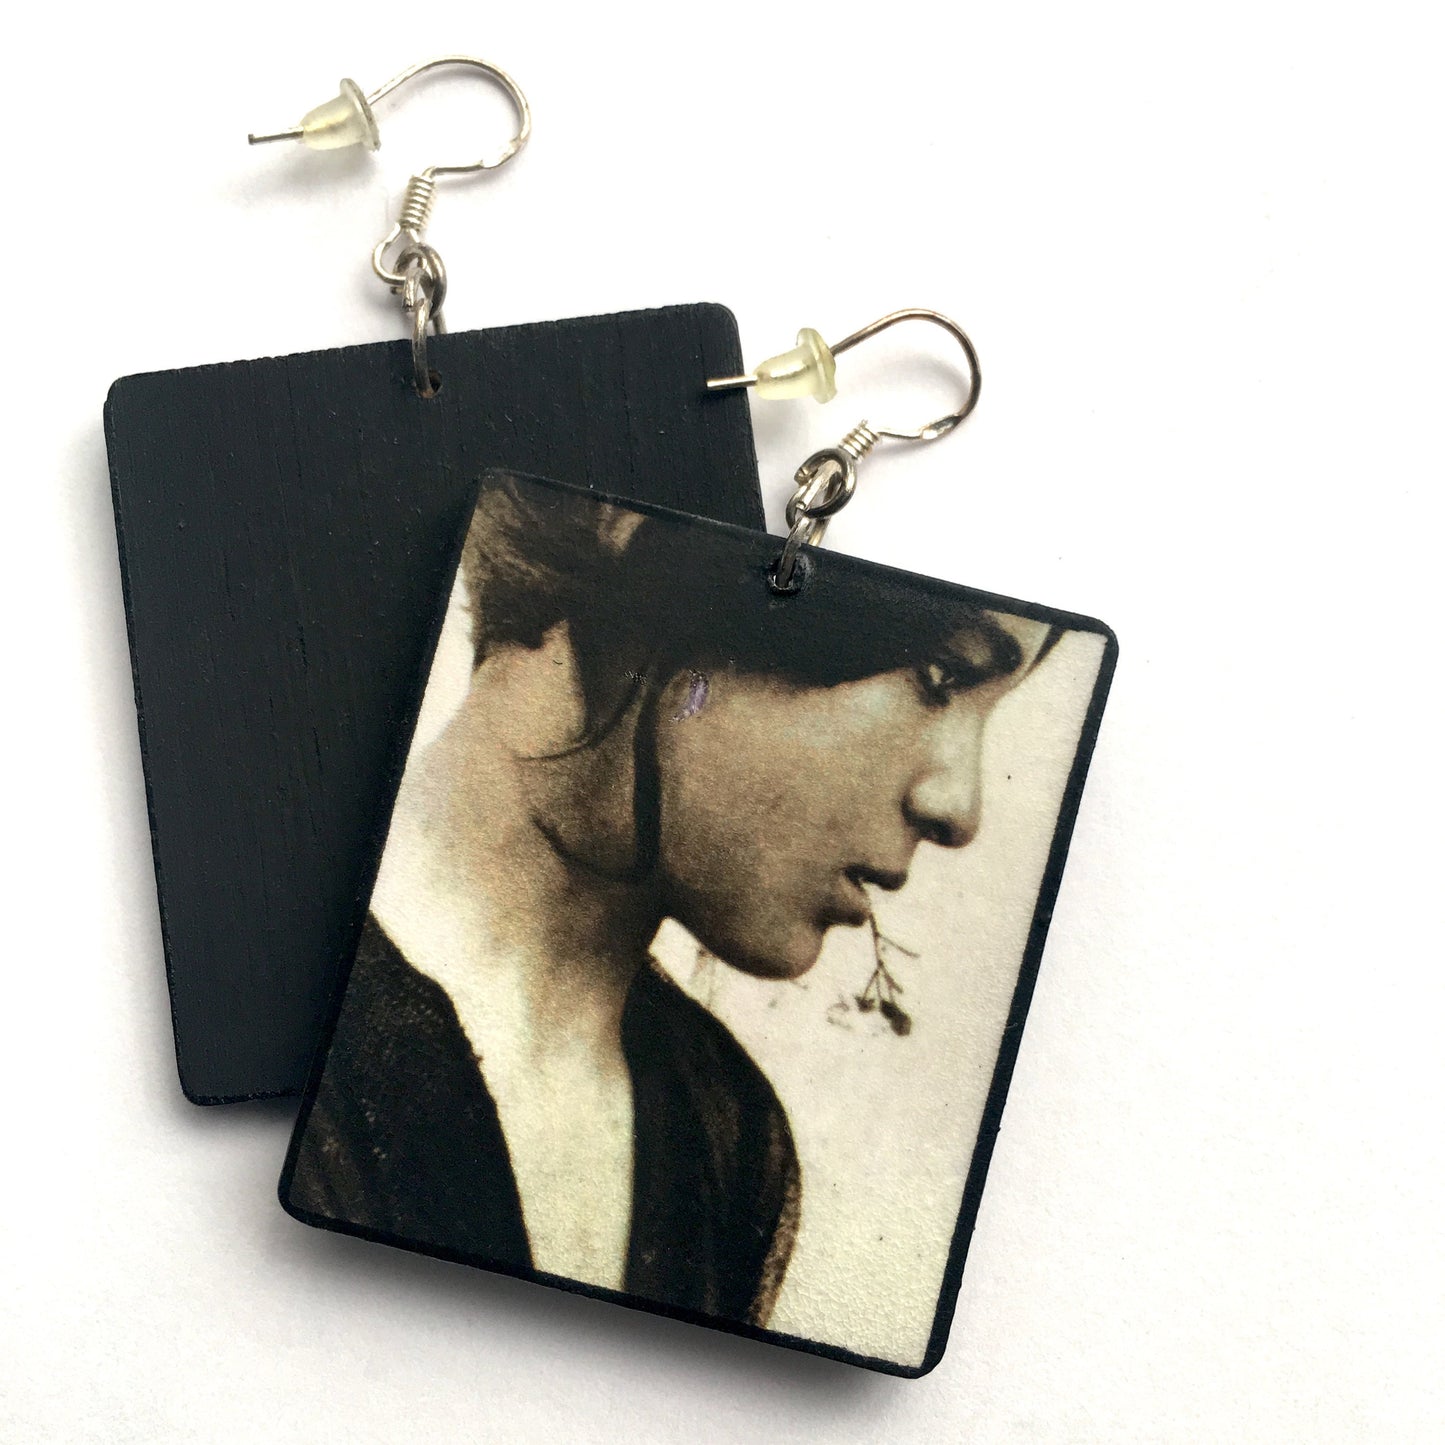 Symmetrical mismatched Art Earrings, Wood and real silver hooks. Inspired by Wilhelm von Gloeden.